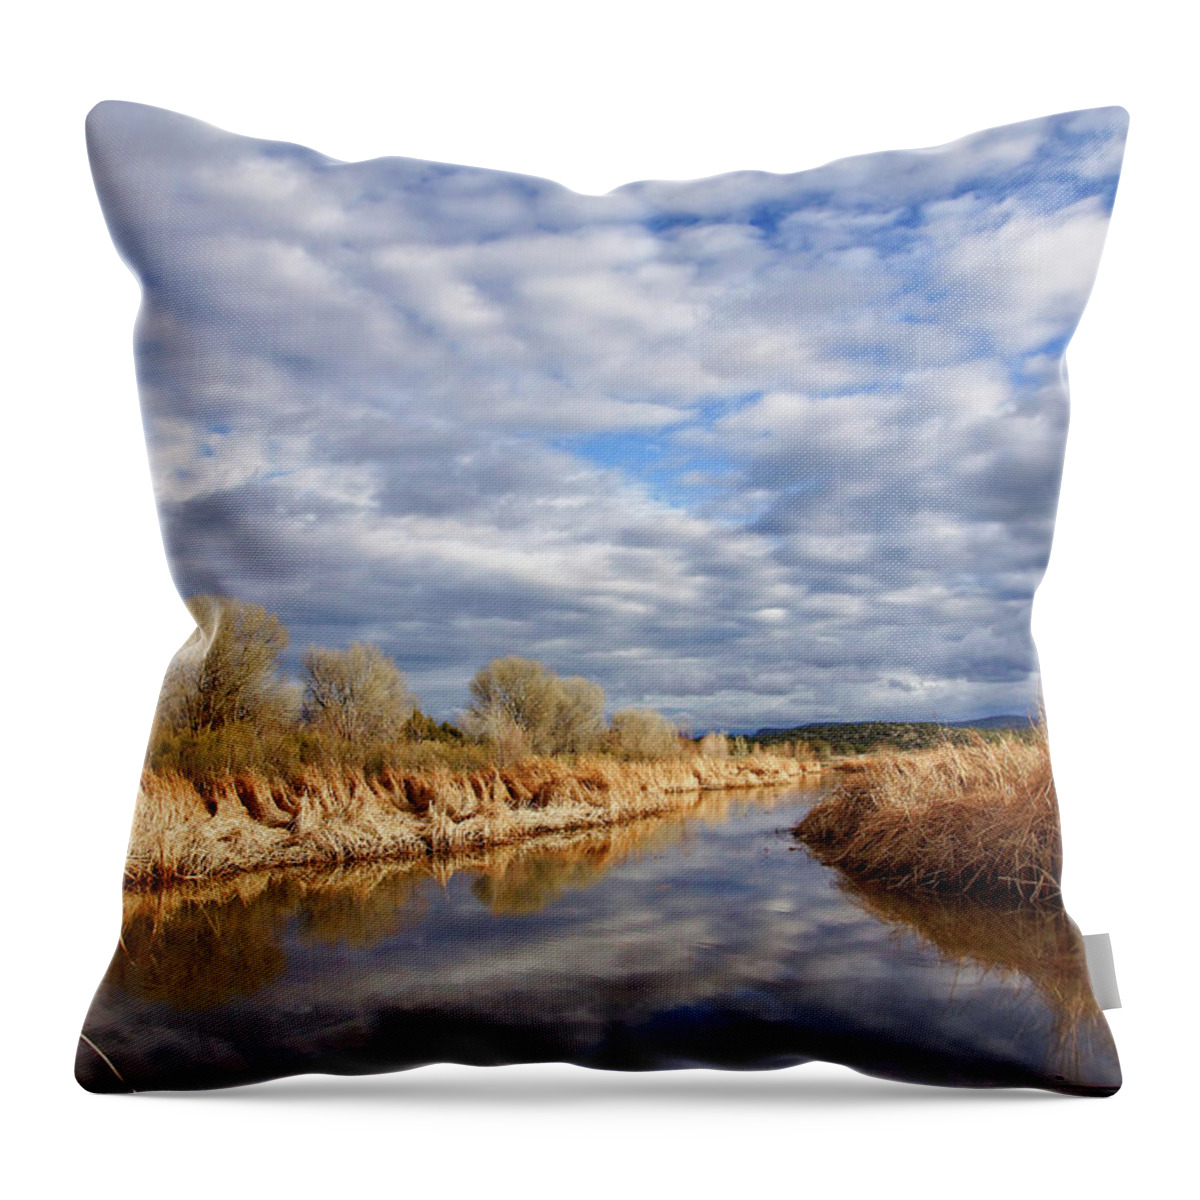 Reflections Throw Pillow featuring the photograph Sedona Wetlands by Leda Robertson